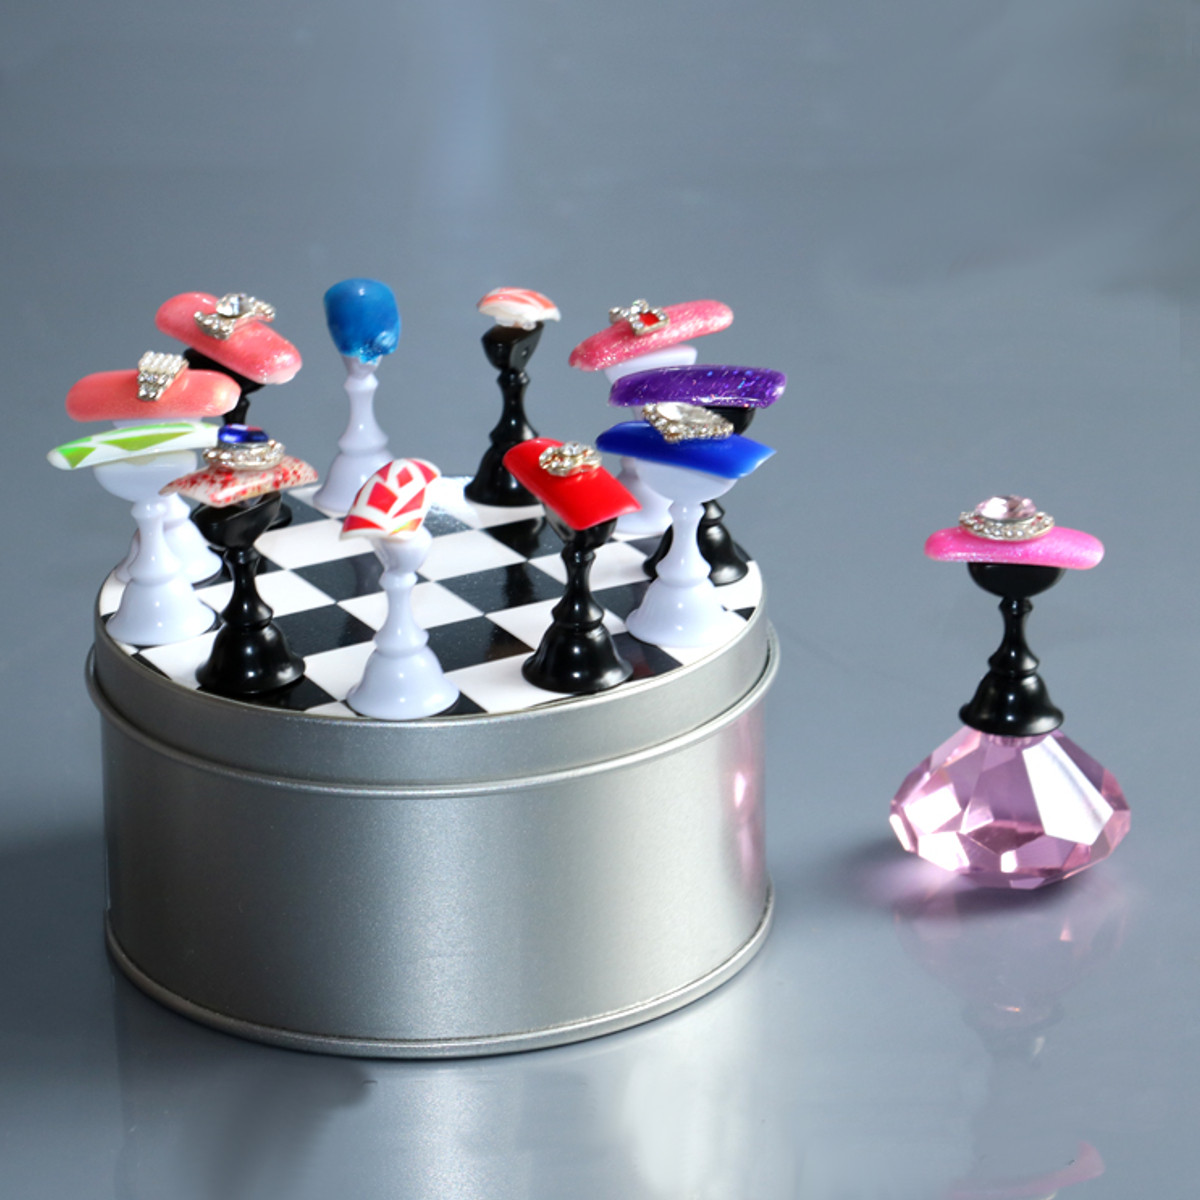 

12 Pcs Chess Board Nail Art Tips Display Holder Crystal Magnetic Stand Set Manicure Salon